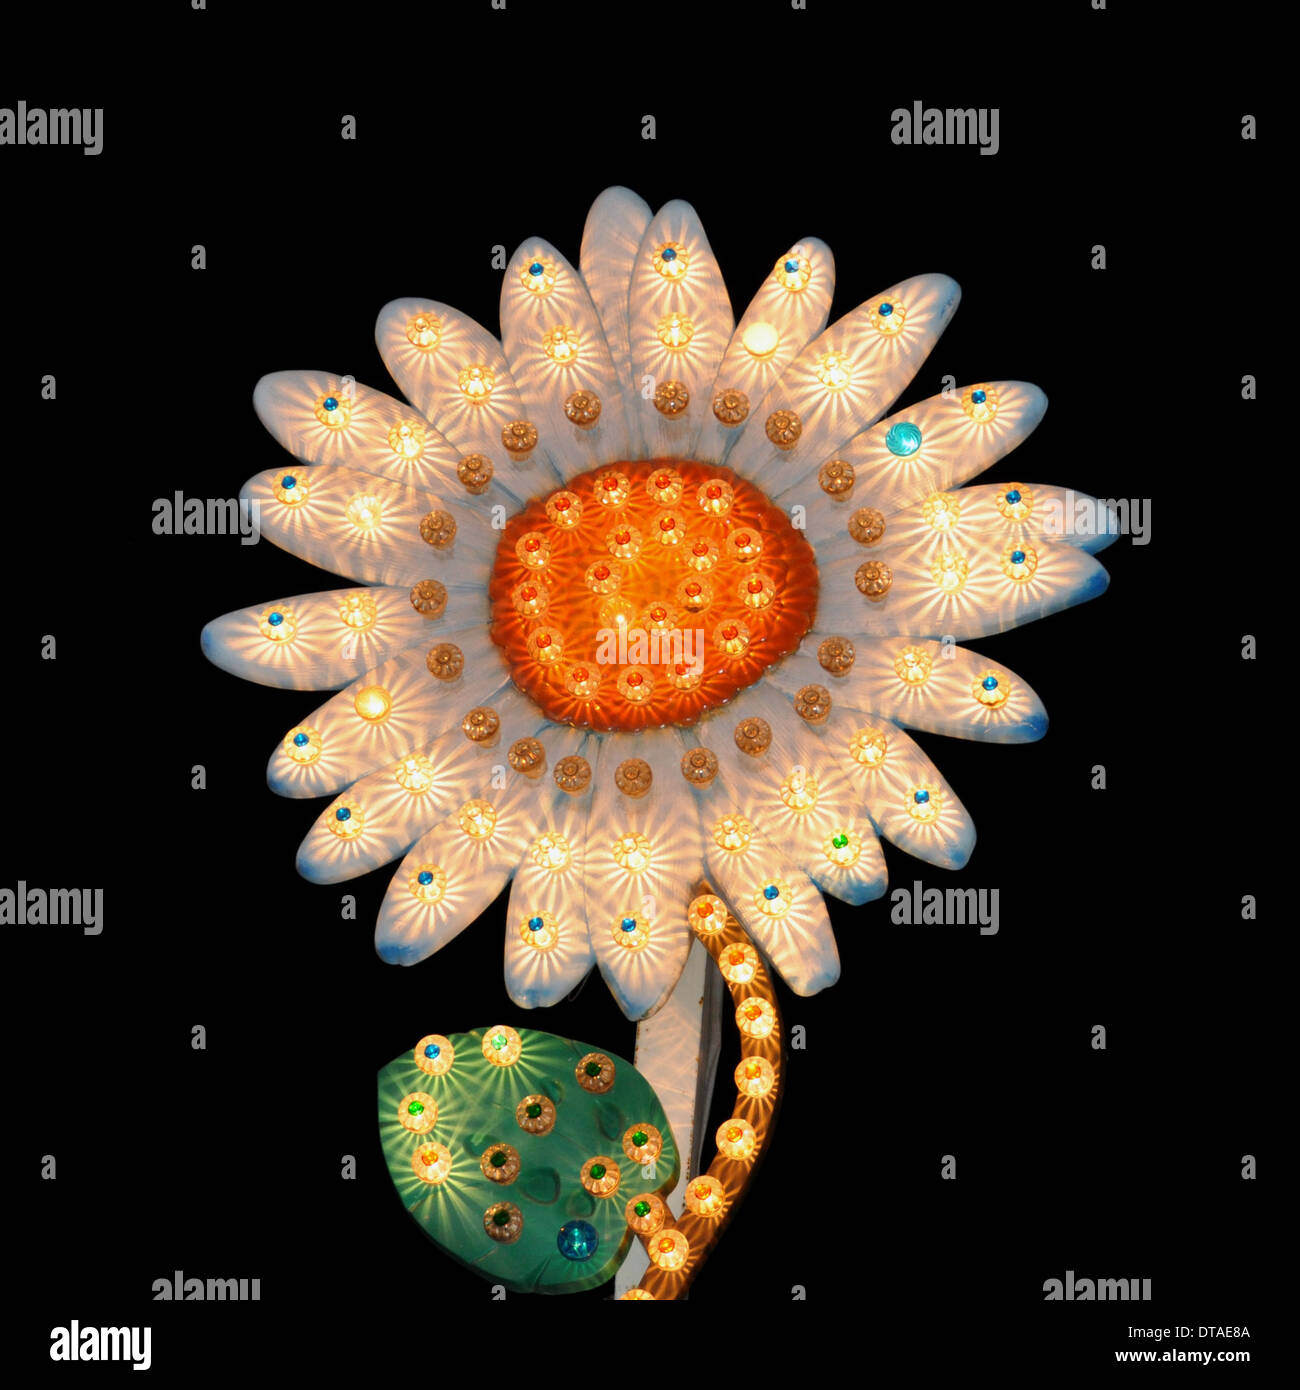 Sideshow daisy flower display with flashing lights at night. Stock Photo